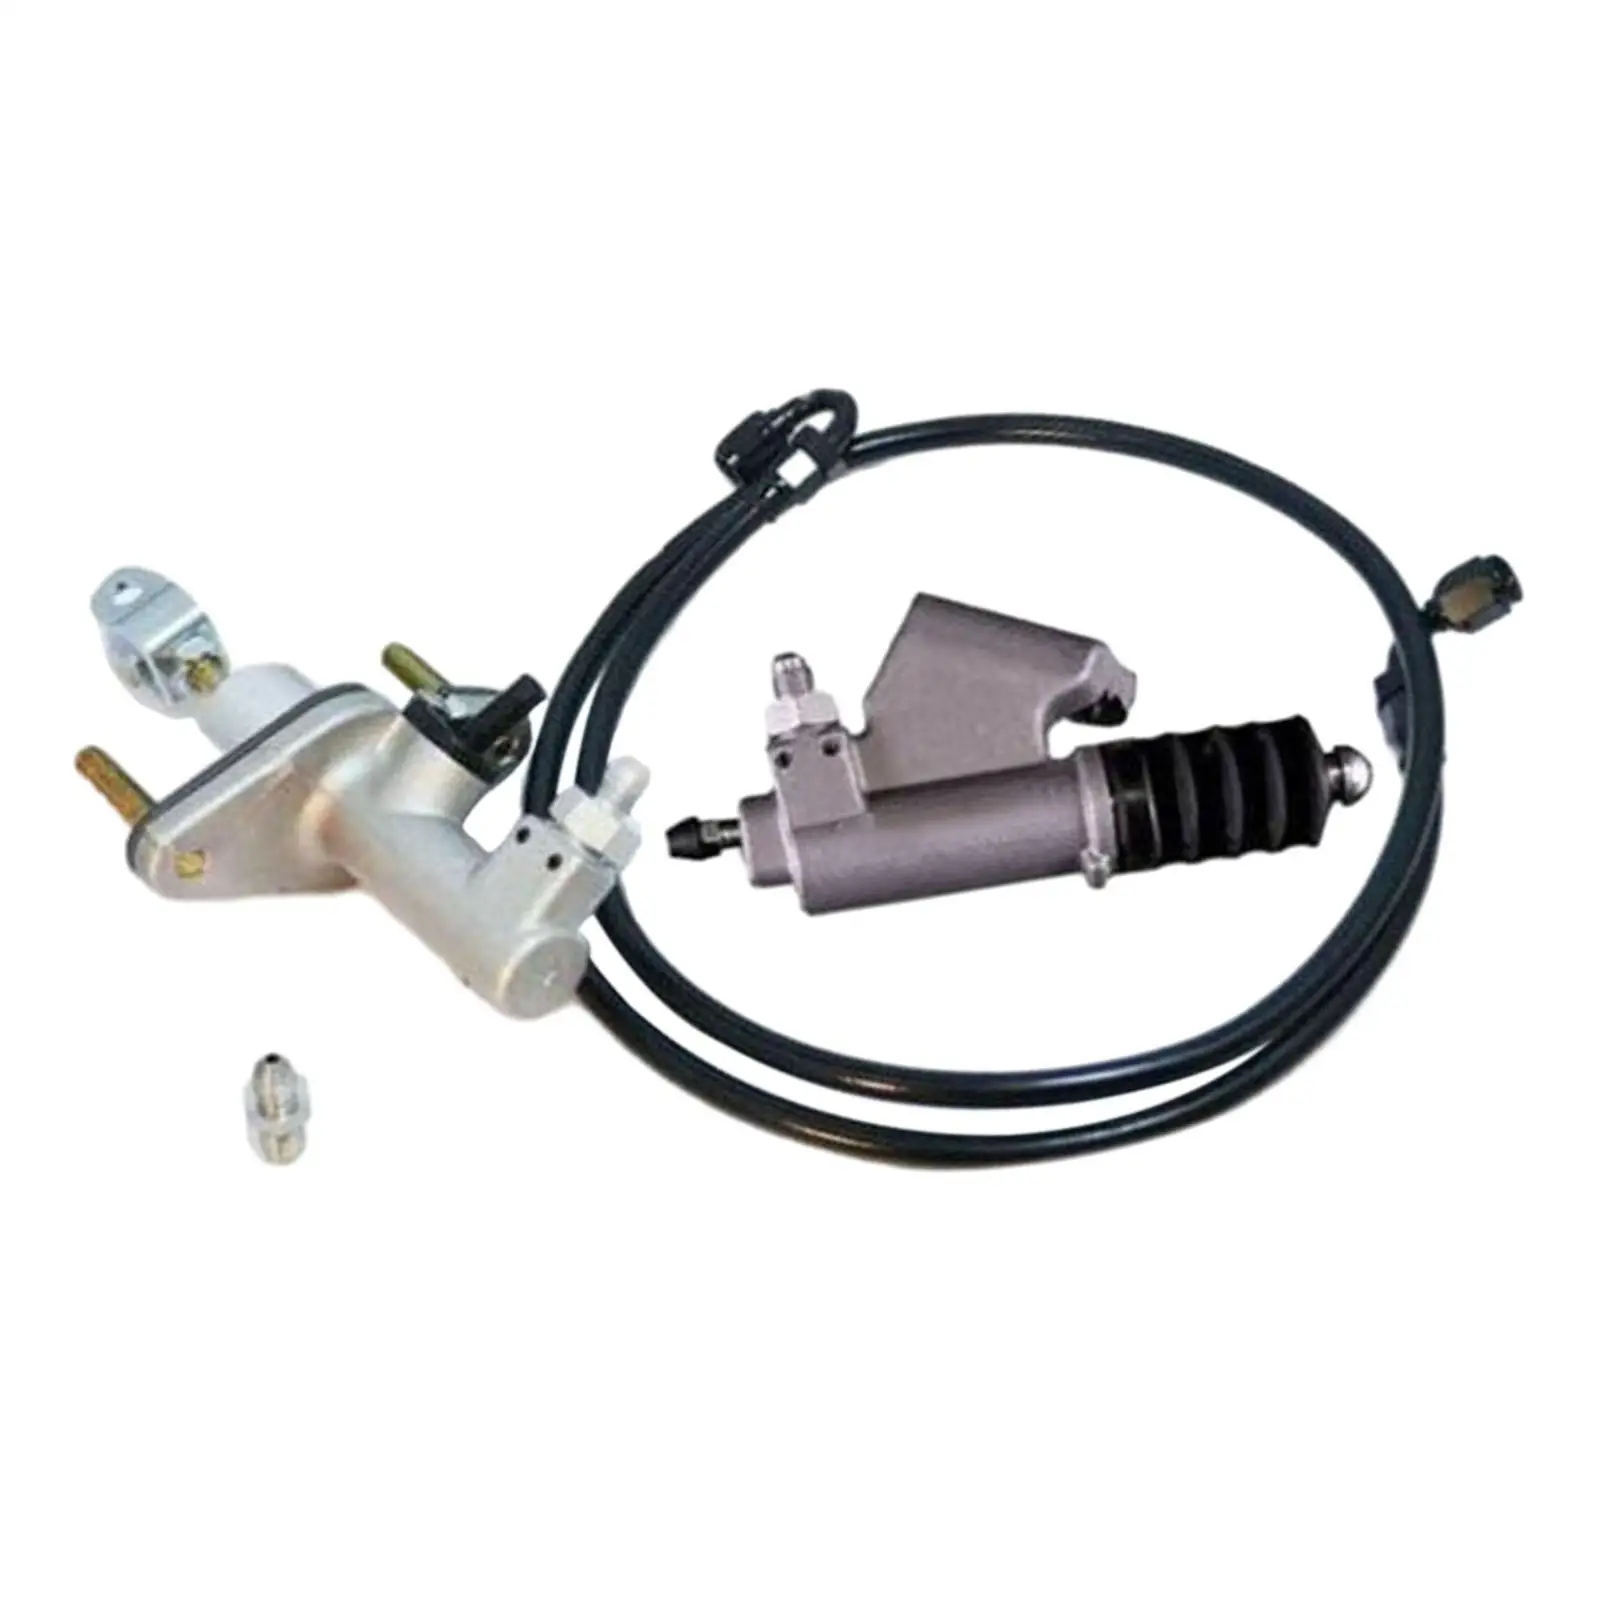 Ktd-clk-kms Clutch Master Cylinder Kit for Acura Direct Replacement